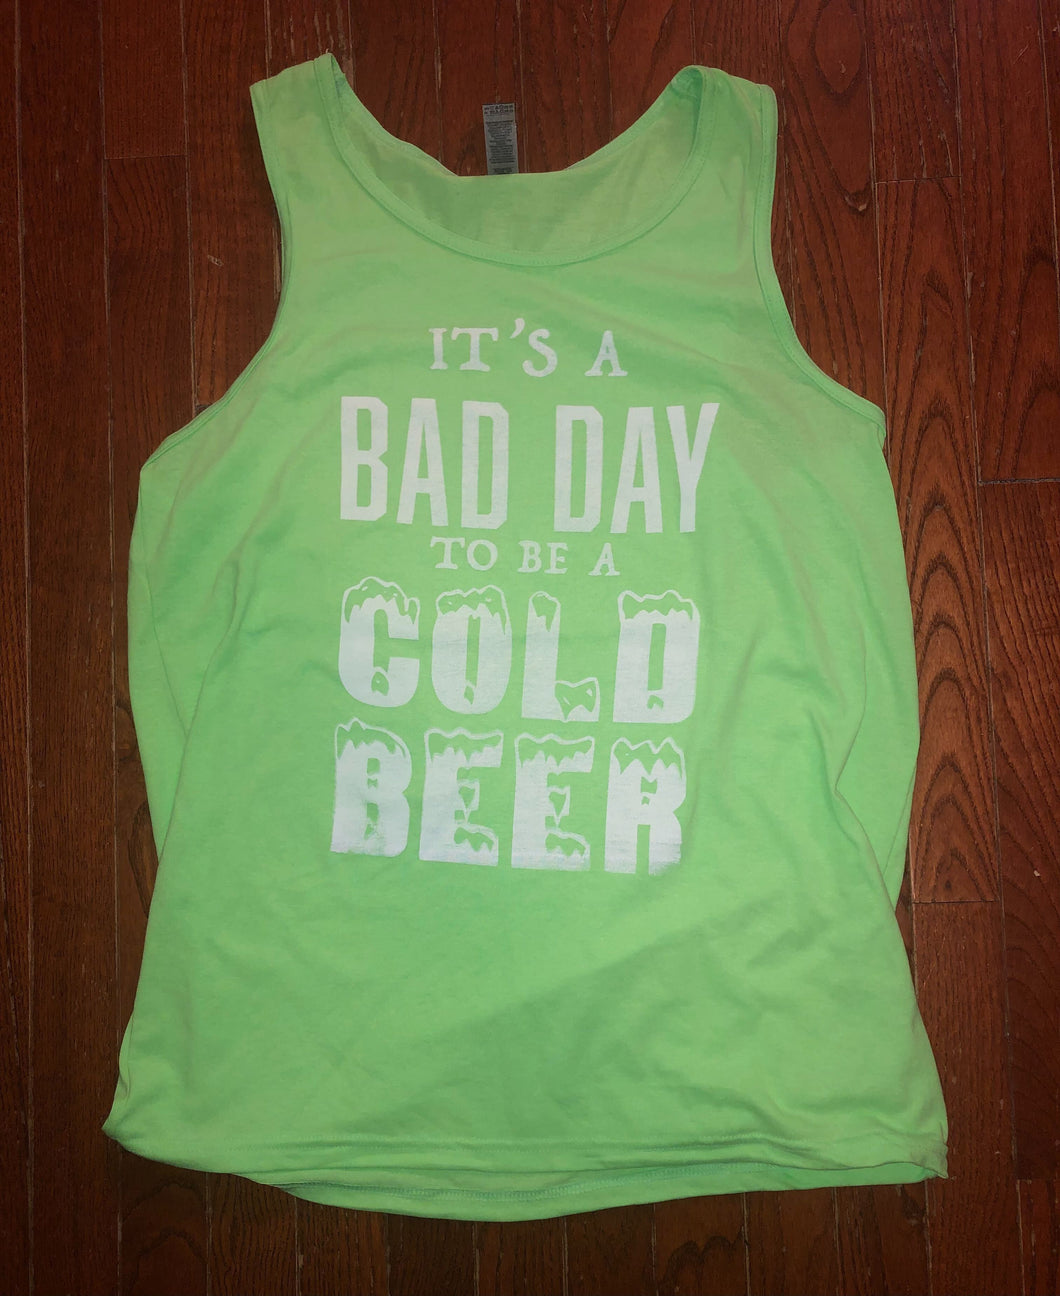 PREORDER: Bad Day to be a Cold Beer Tank Tops